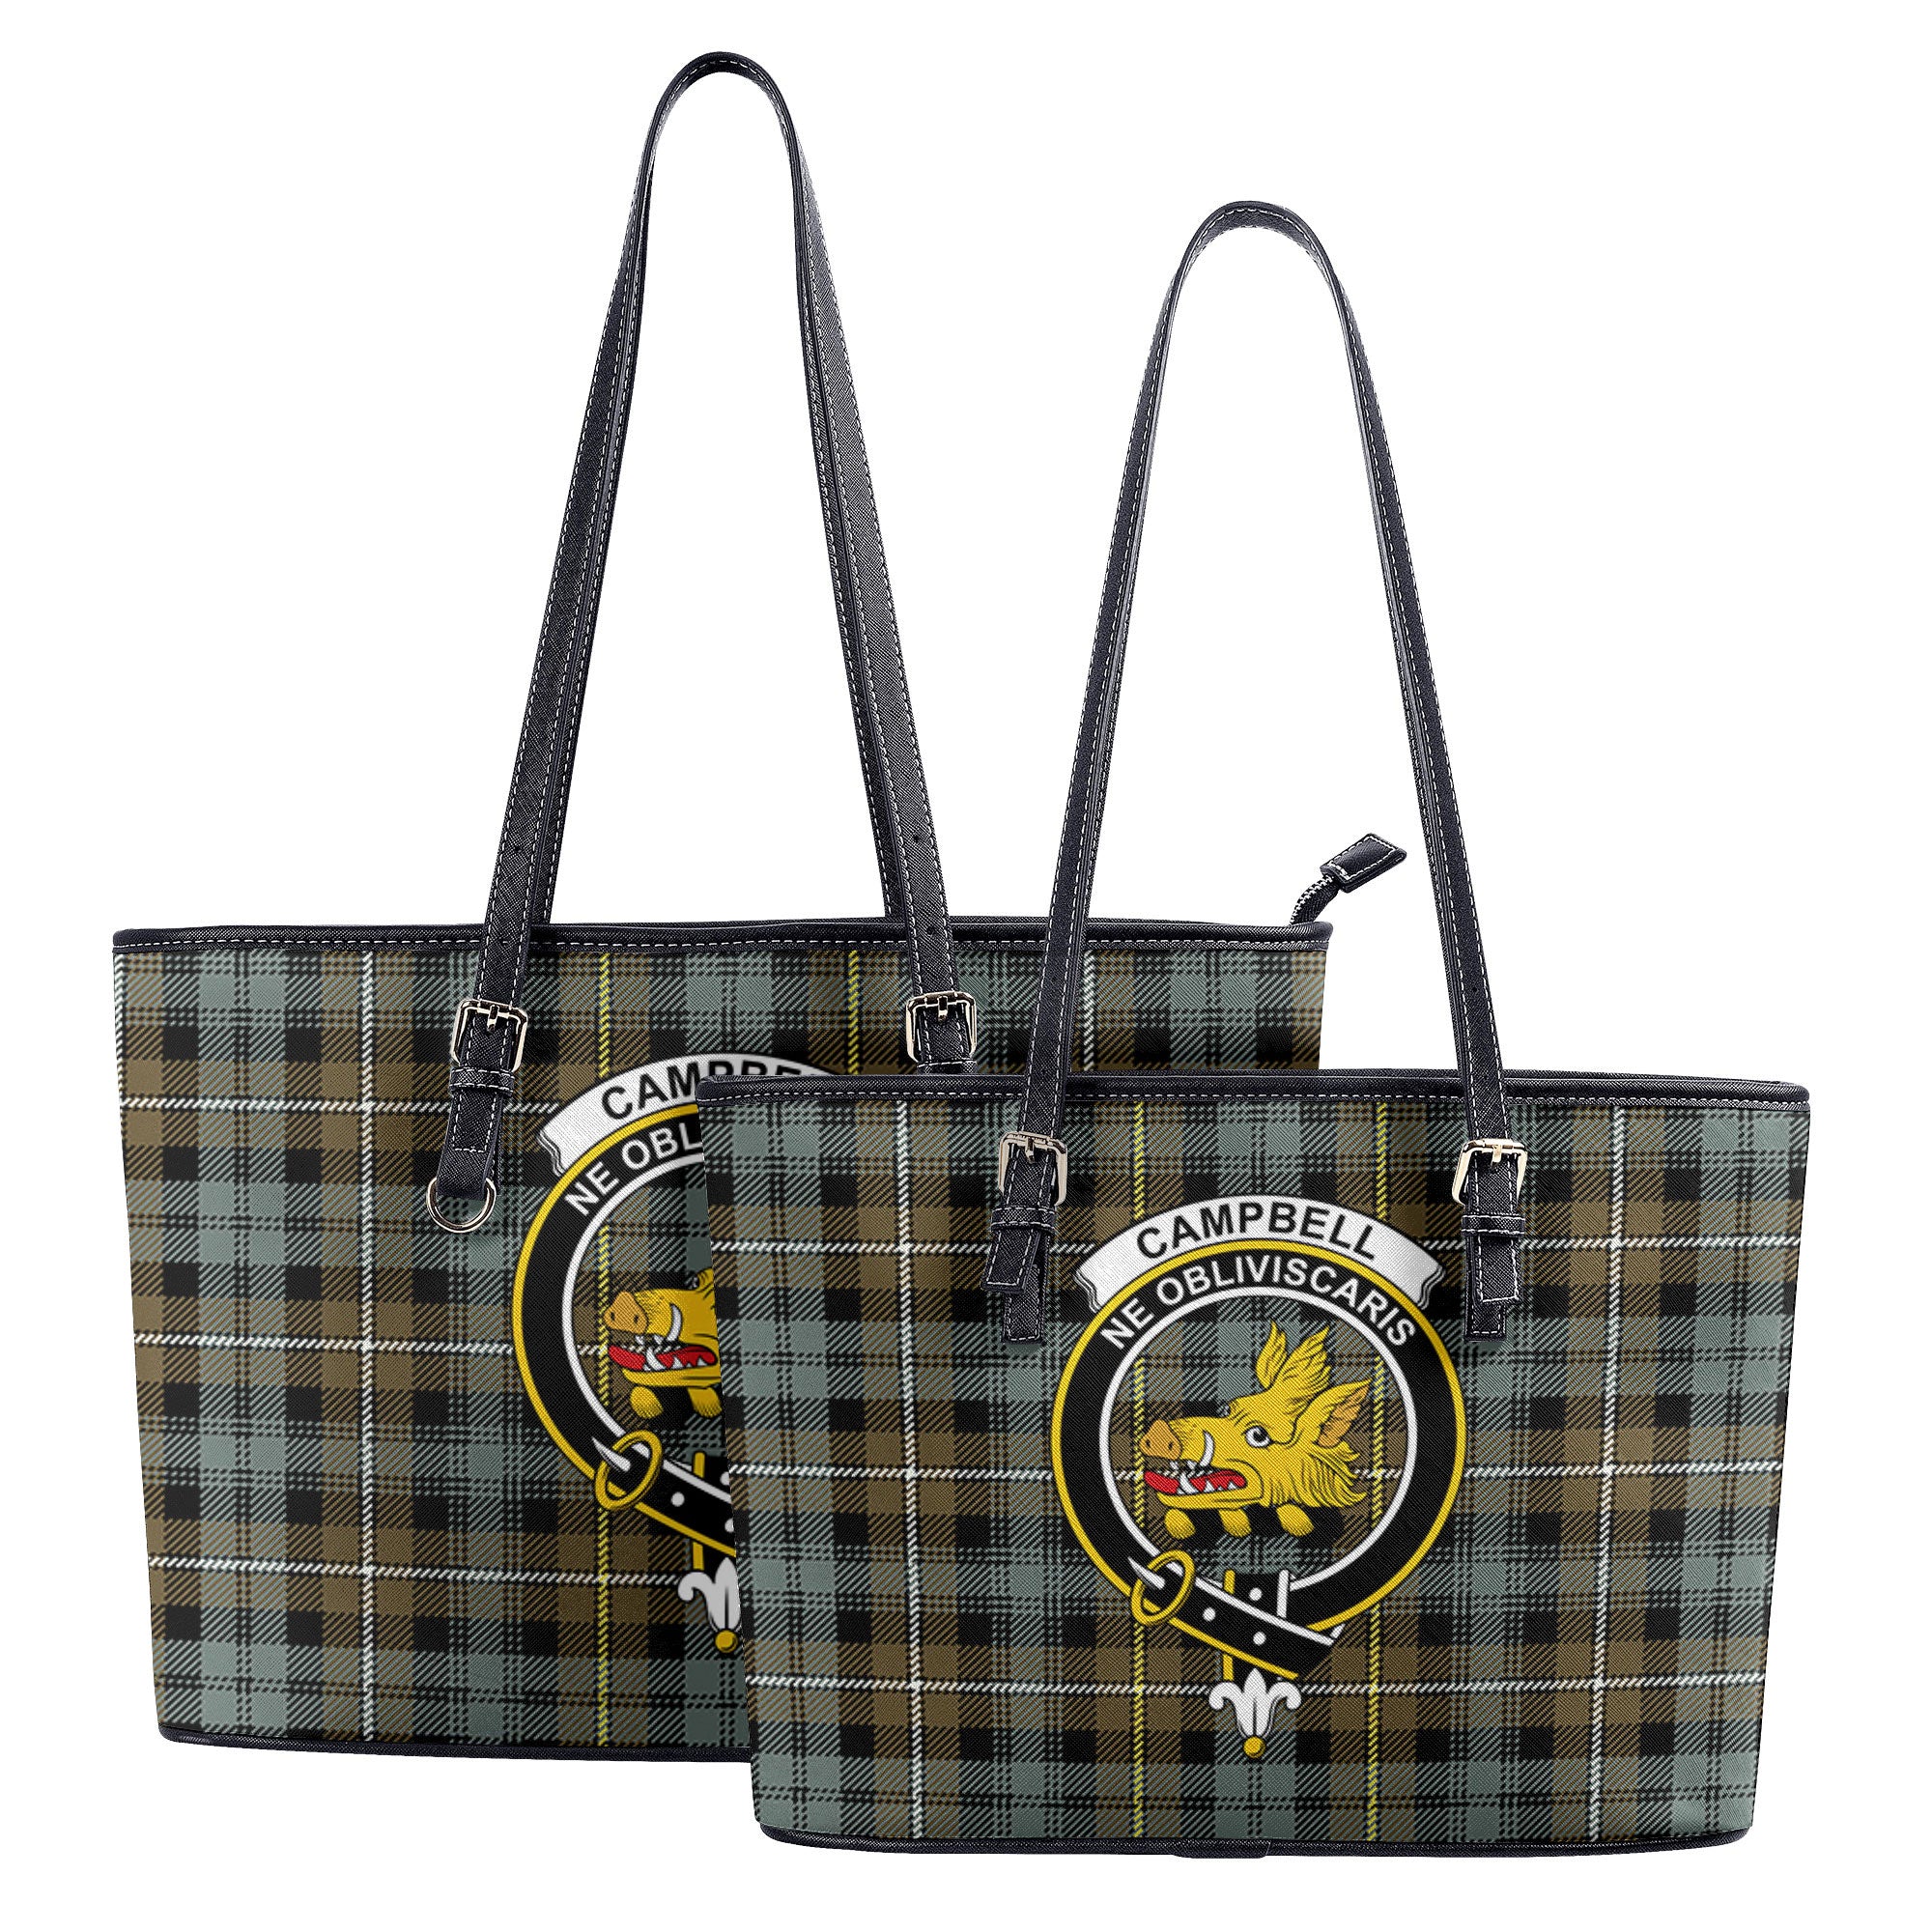 Campbell Argyll Weathered Tartan Crest Leather Tote Bag